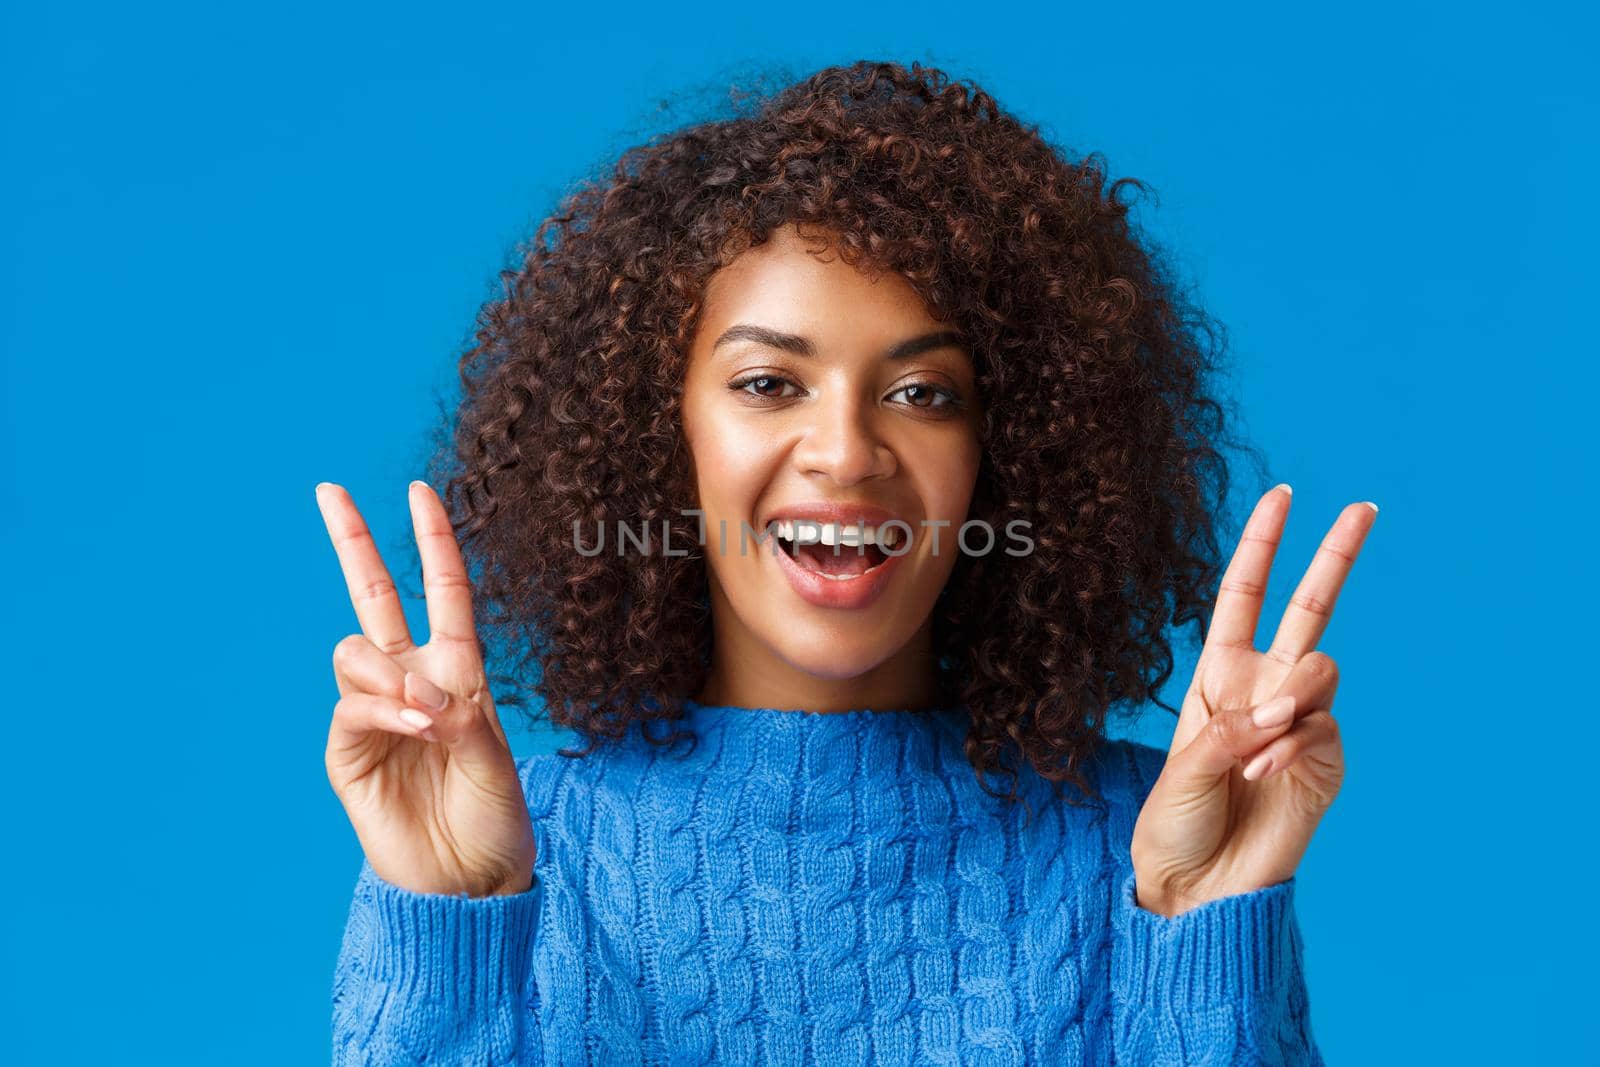 Charismatic excited and happy, smiling cheerful african american woman sending positive vibes, showing peace gesture and grinning, enjoying winter holidays, new year party, say cheese.